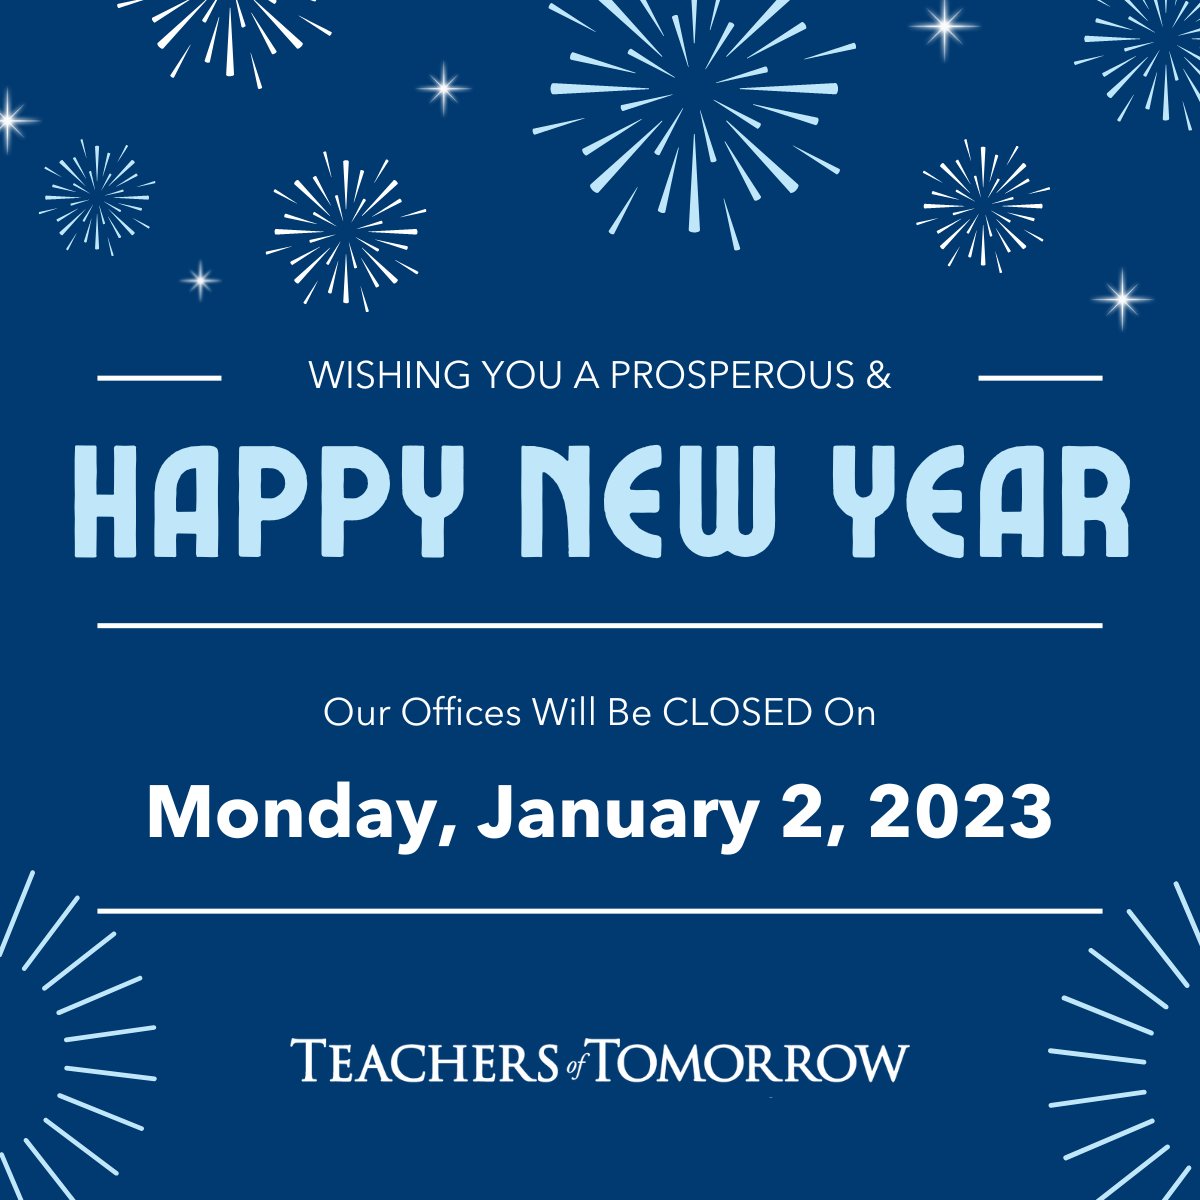 🎆Happy New Year from the Teachers of Tomorrow family. Wishing you a happy and healthy 2023. 🎆 Remember it's never too late to start a new profession. Choose teaching bit.ly/3ic1skV
.
#NewCareer #TeachersofTomorrow #ChooseTeaching #ChooseWorkThatsWorthIt #HappyNewYear